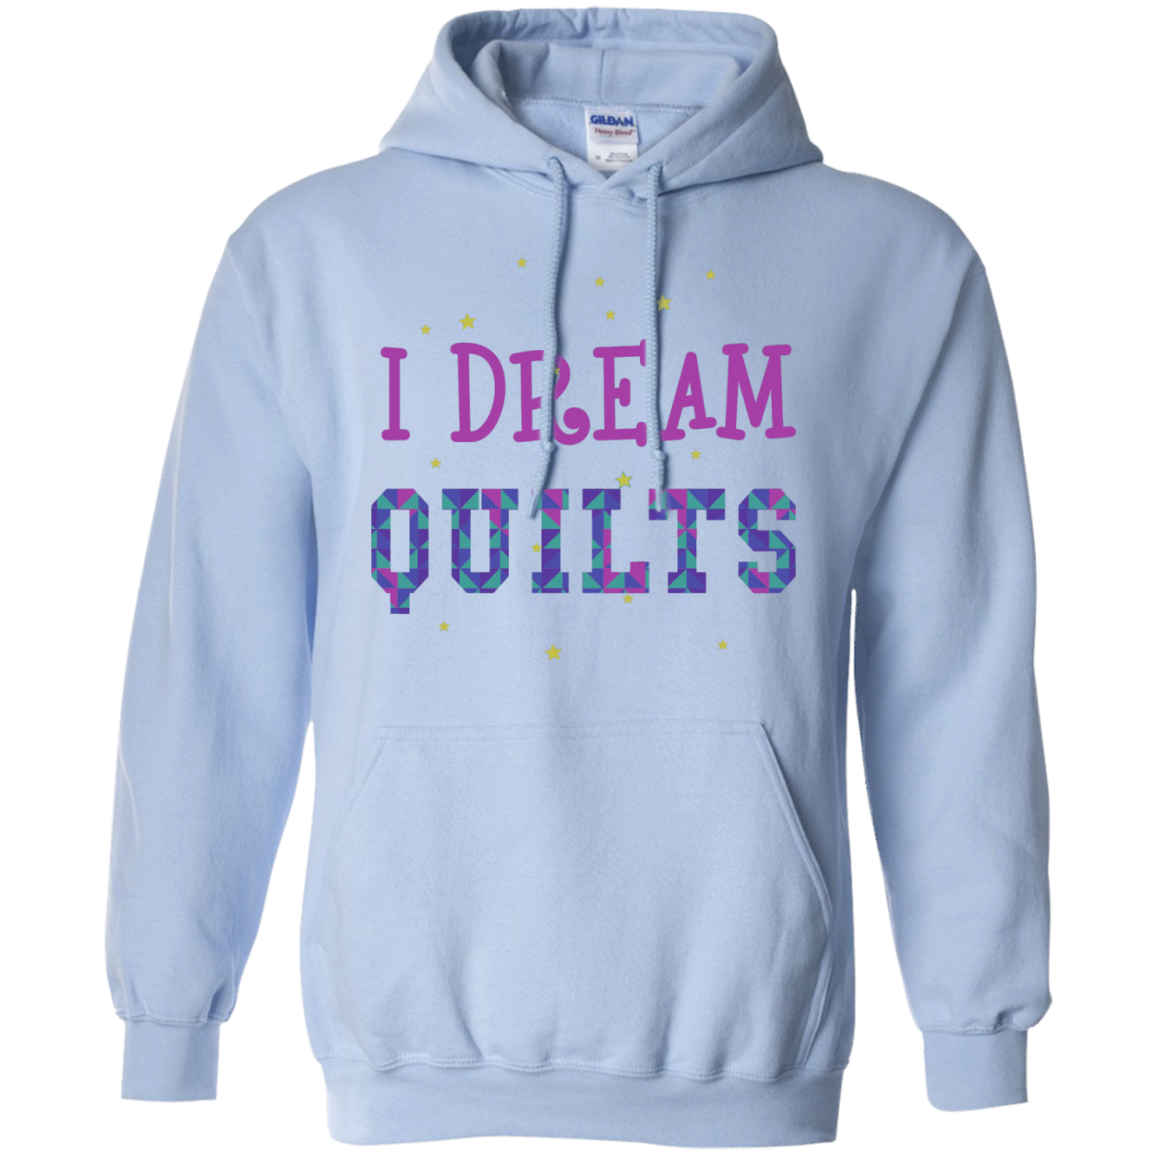 I Dream Quilts Pullover Hoodie - Crafter4Life - 8